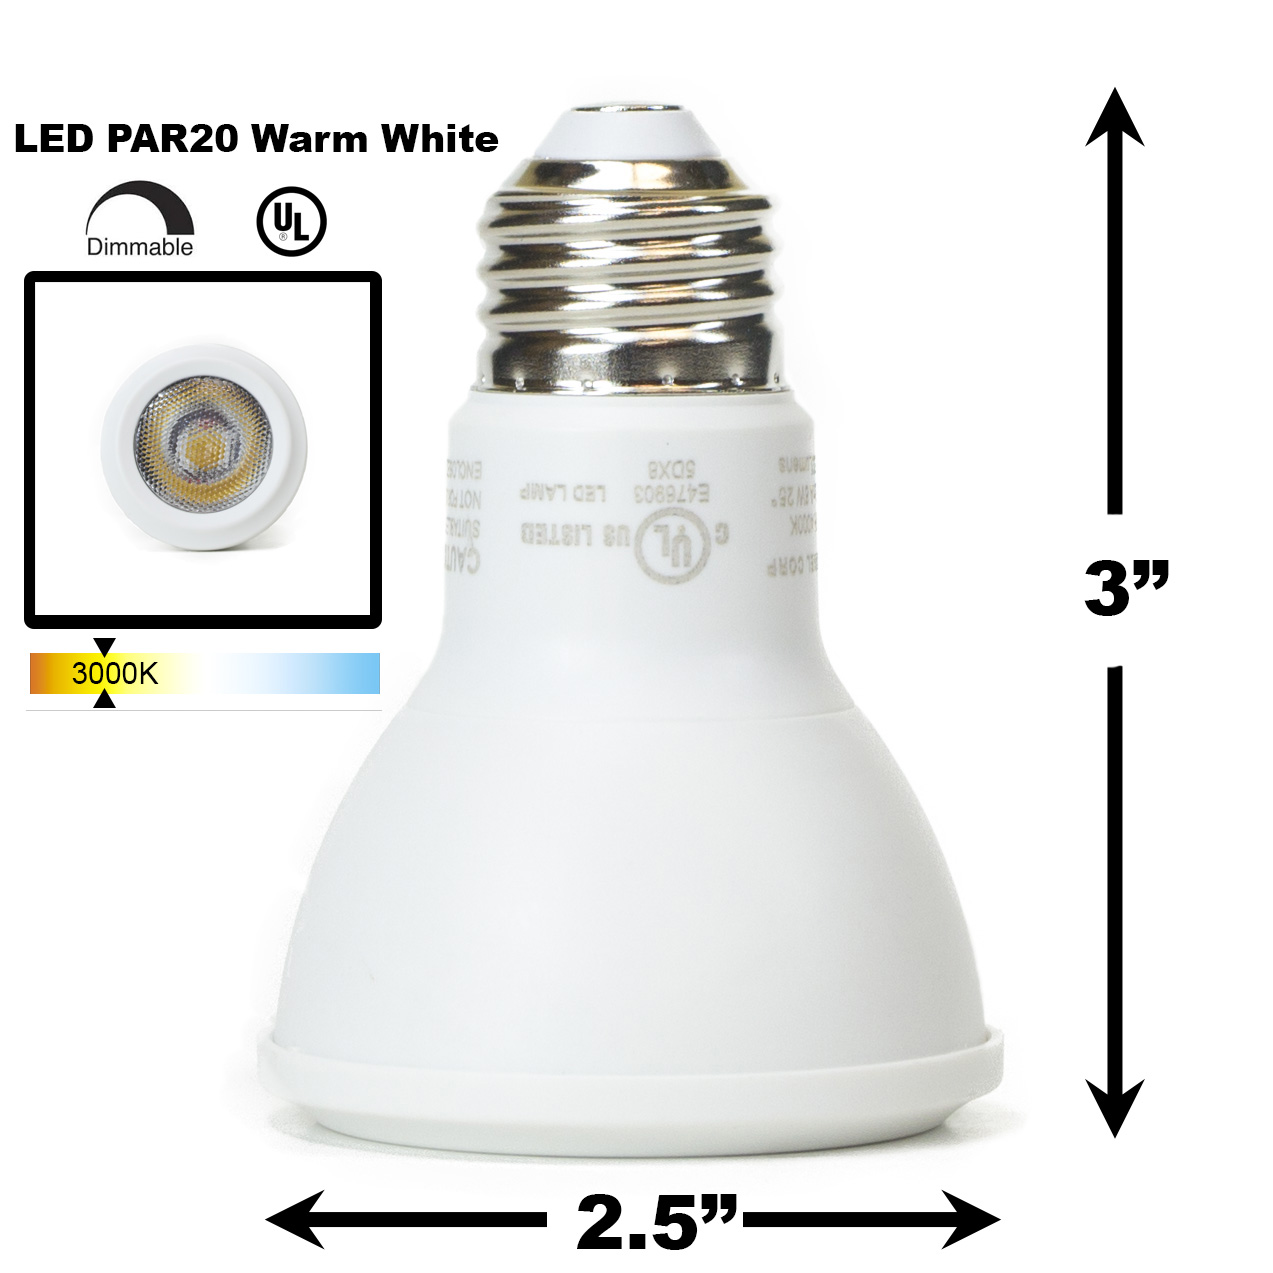 Buy LED Light Bulbs GU10 Energy Star Certified. In Stock & Fast Ship. No  Tax Except in CA. (888)628-8166